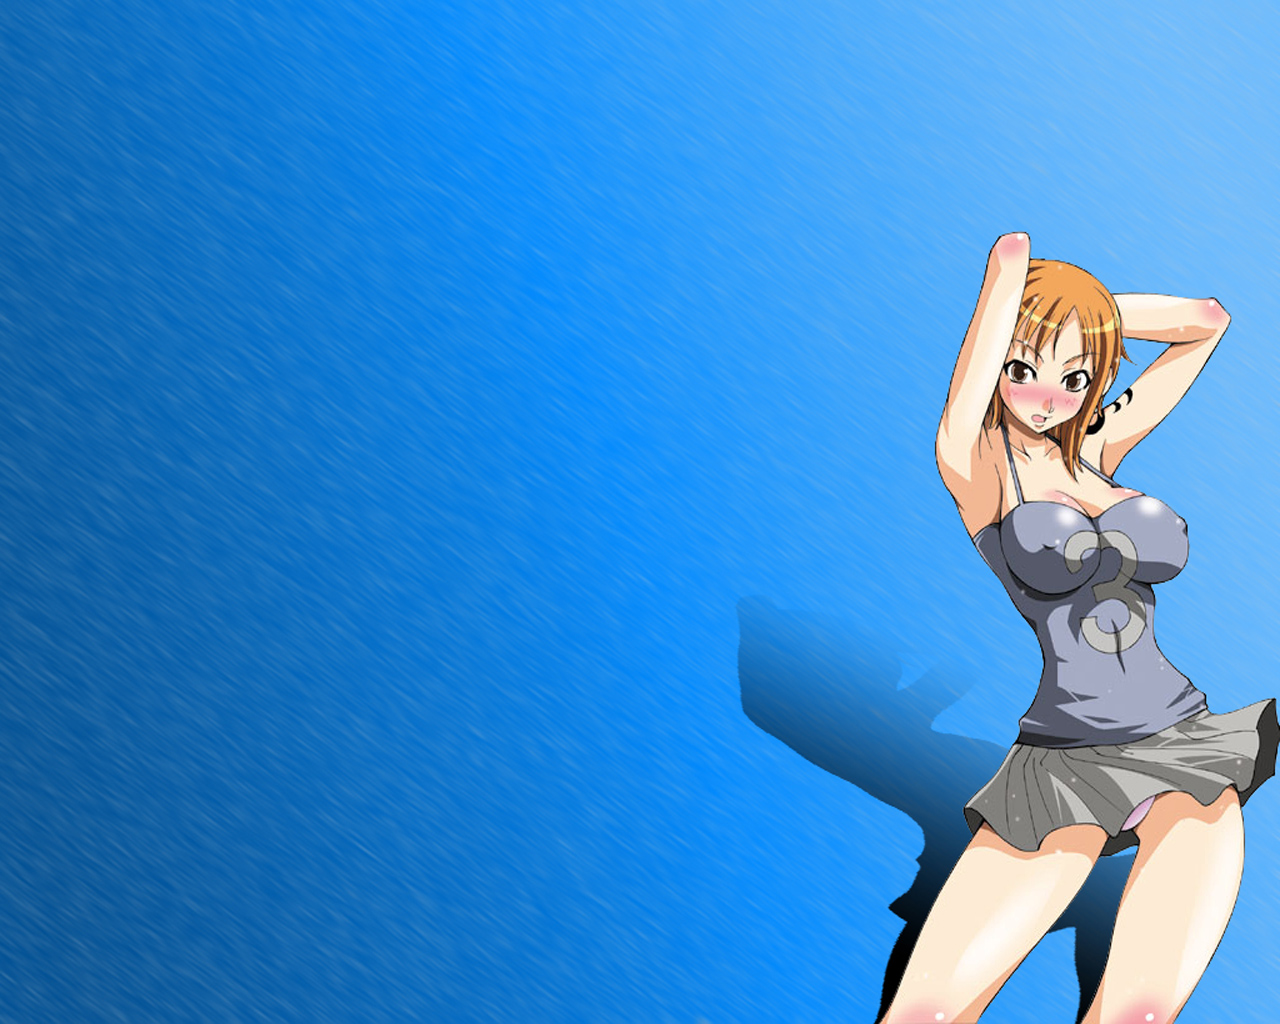 Download Nami Sexy Wallpaper In Onepice Anime NAMI Wallpapers Nami Wallpapers Wallpapers